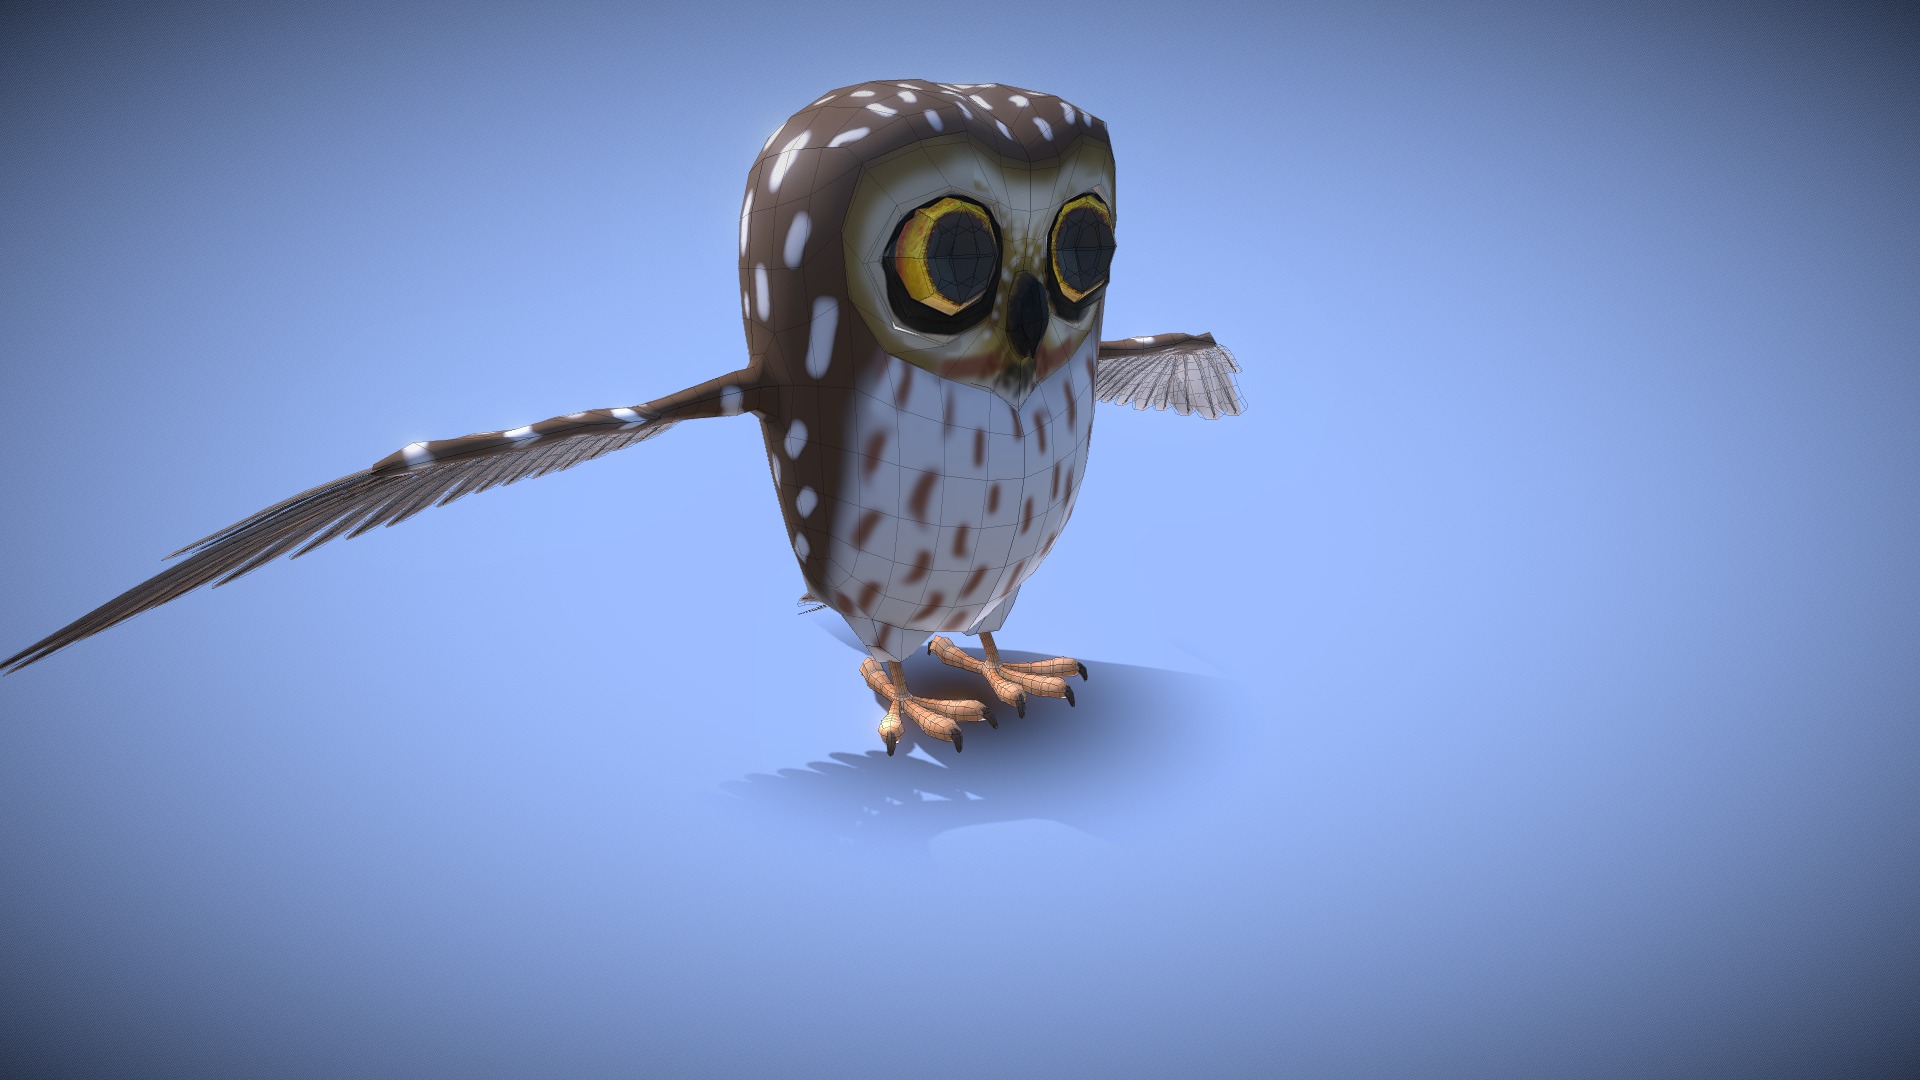 3D model Owl with feather system – Cartoon style - This is a 3D model of the Owl with feather system - Cartoon style. The 3D model is about a bird flying in the sky.